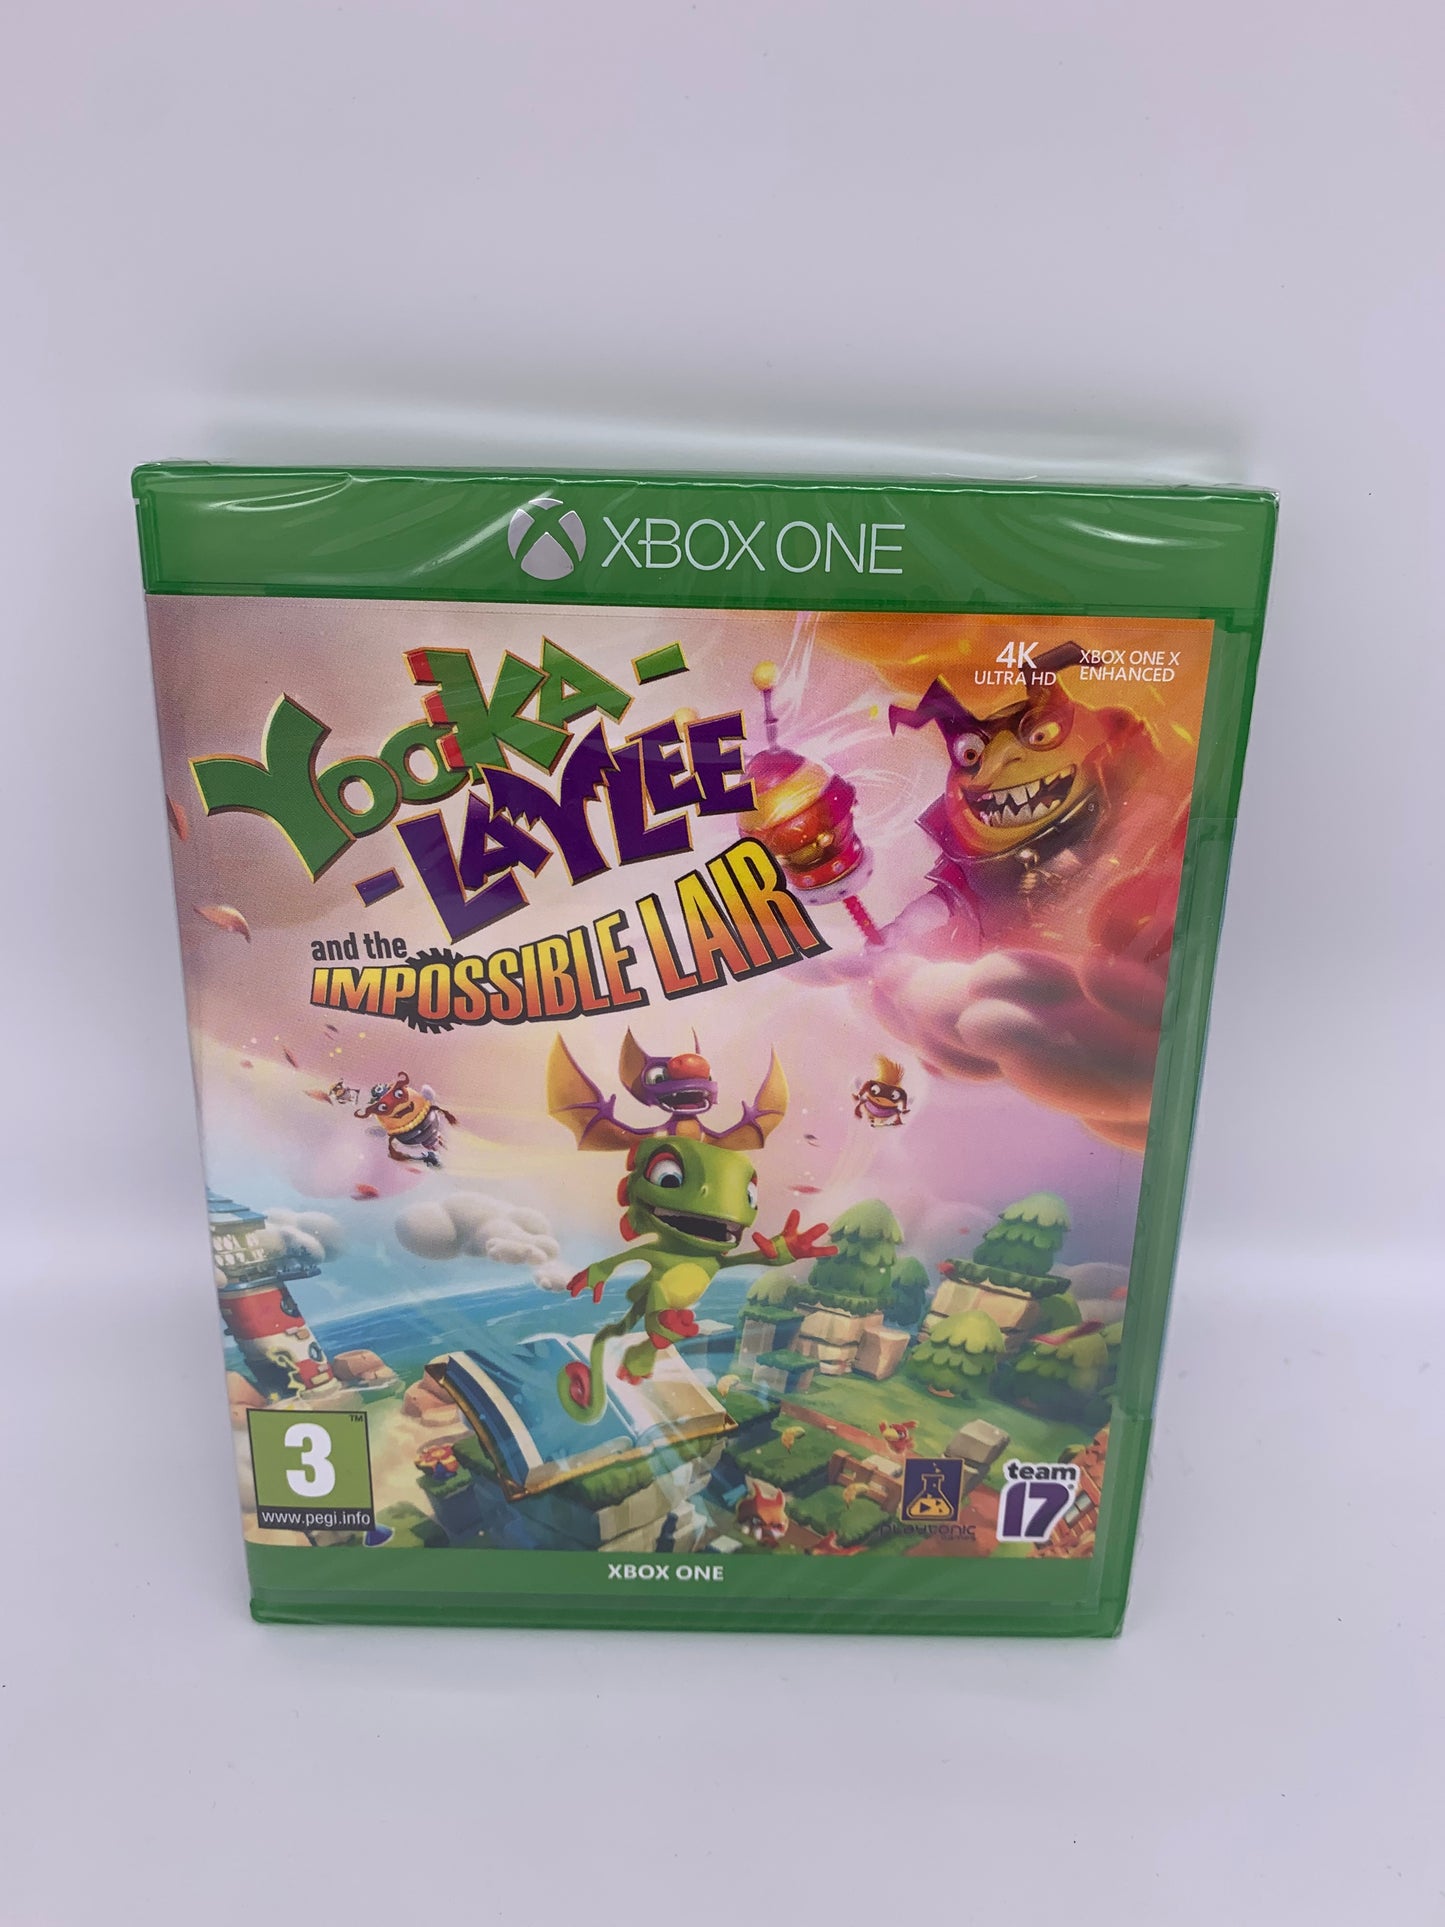 PiXEL-RETRO.COM : MICROSOFT XBOX ONE COMPLETE CIB BOX MANUAL GAME PAL NEW SEALED YOOKA-LAYLEE AND THE IMPOSSIBLE LAIR